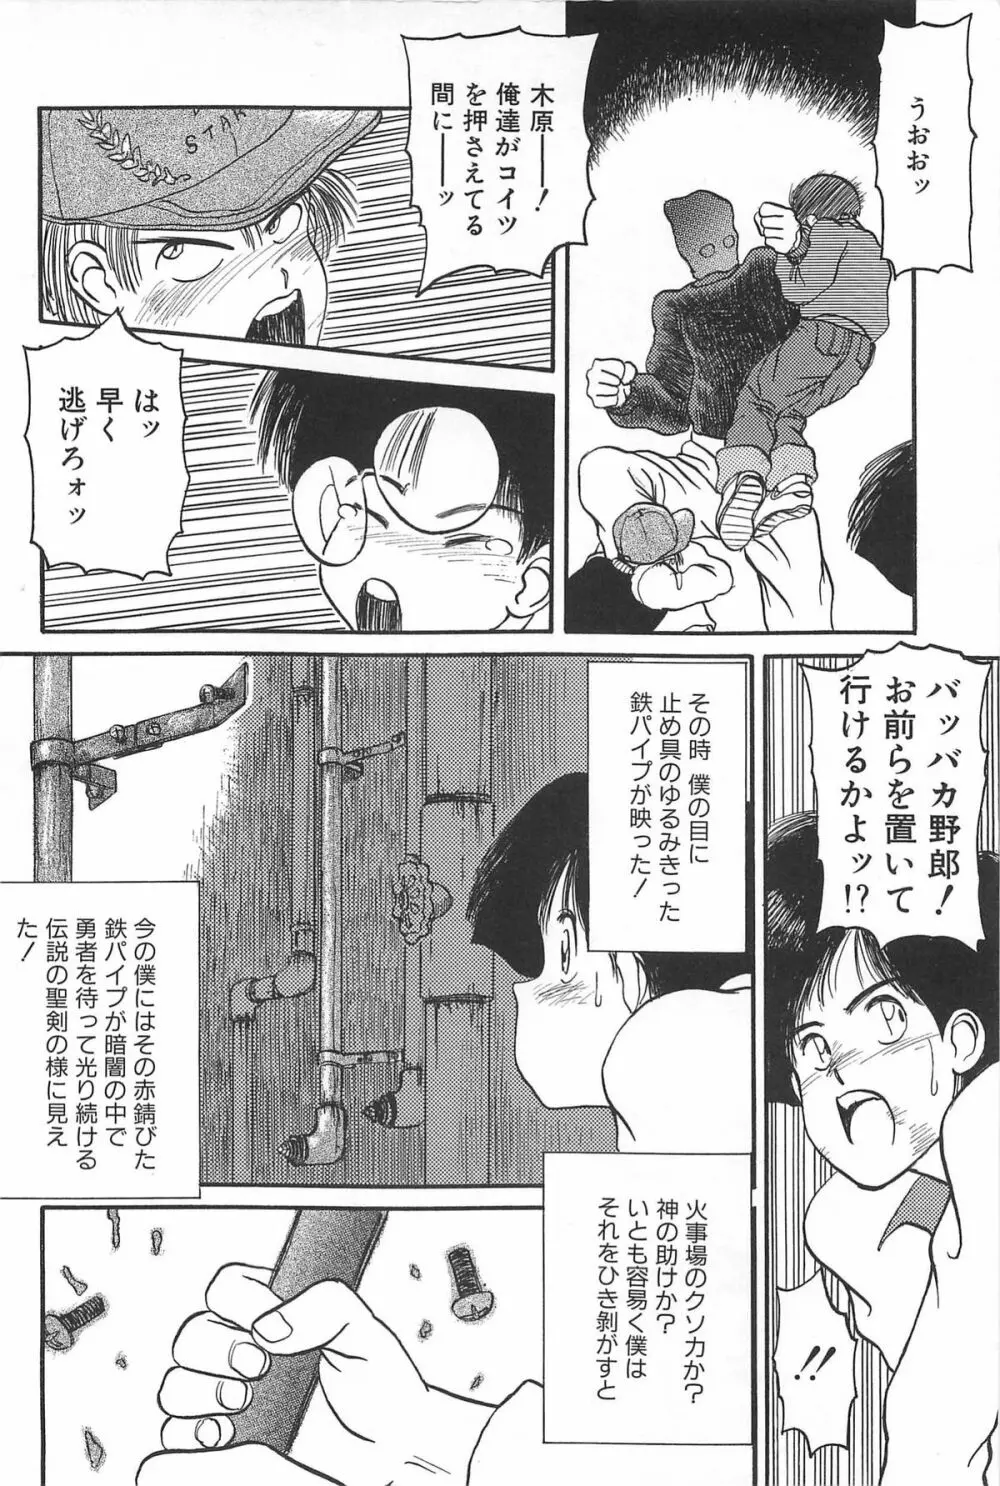 LOVE ME 1995 Page.176